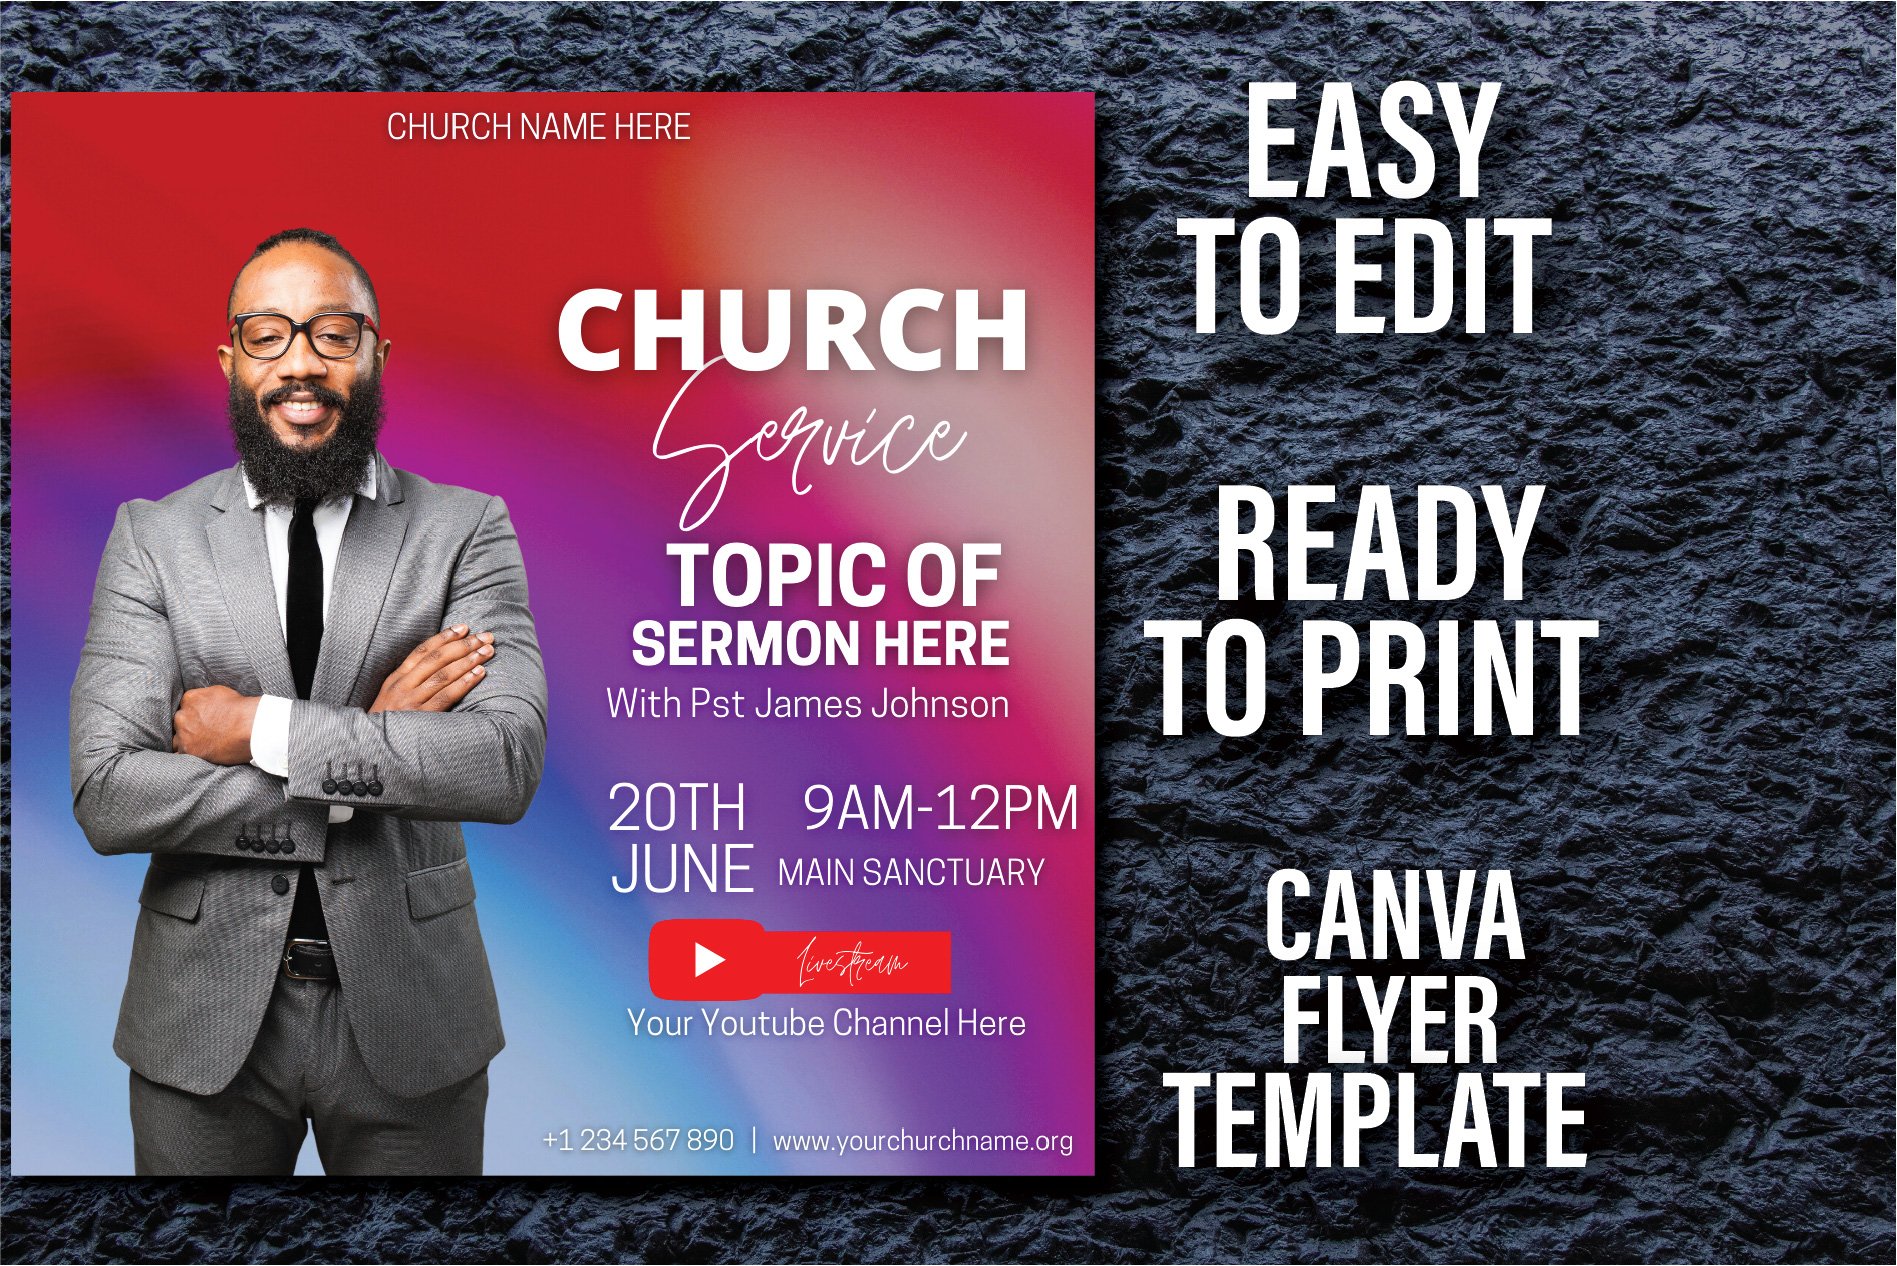 Church Service Canva Template cover image.